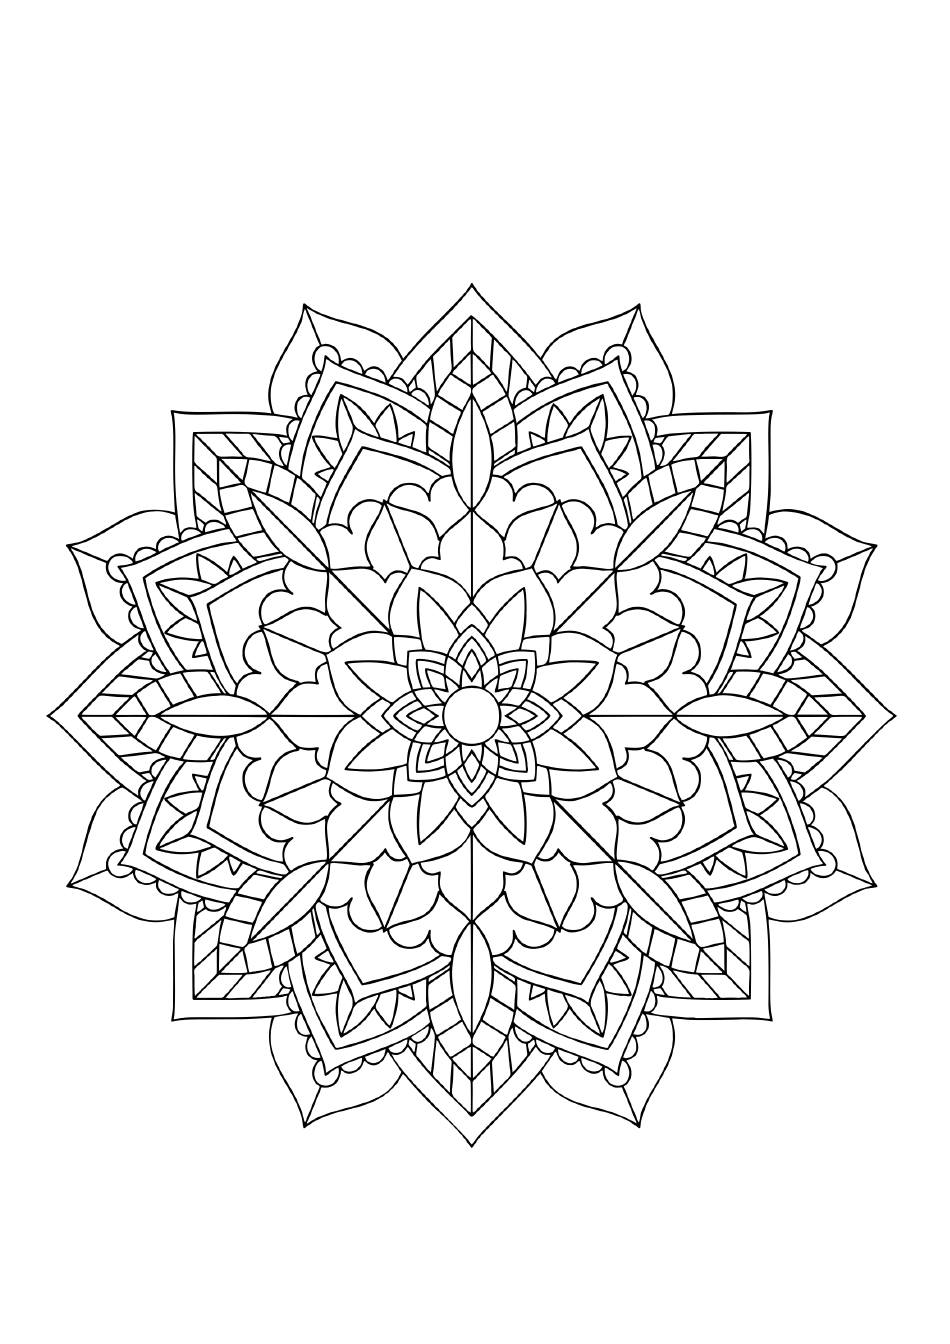 Simple Flower Mandala Coloring Page Image Preview